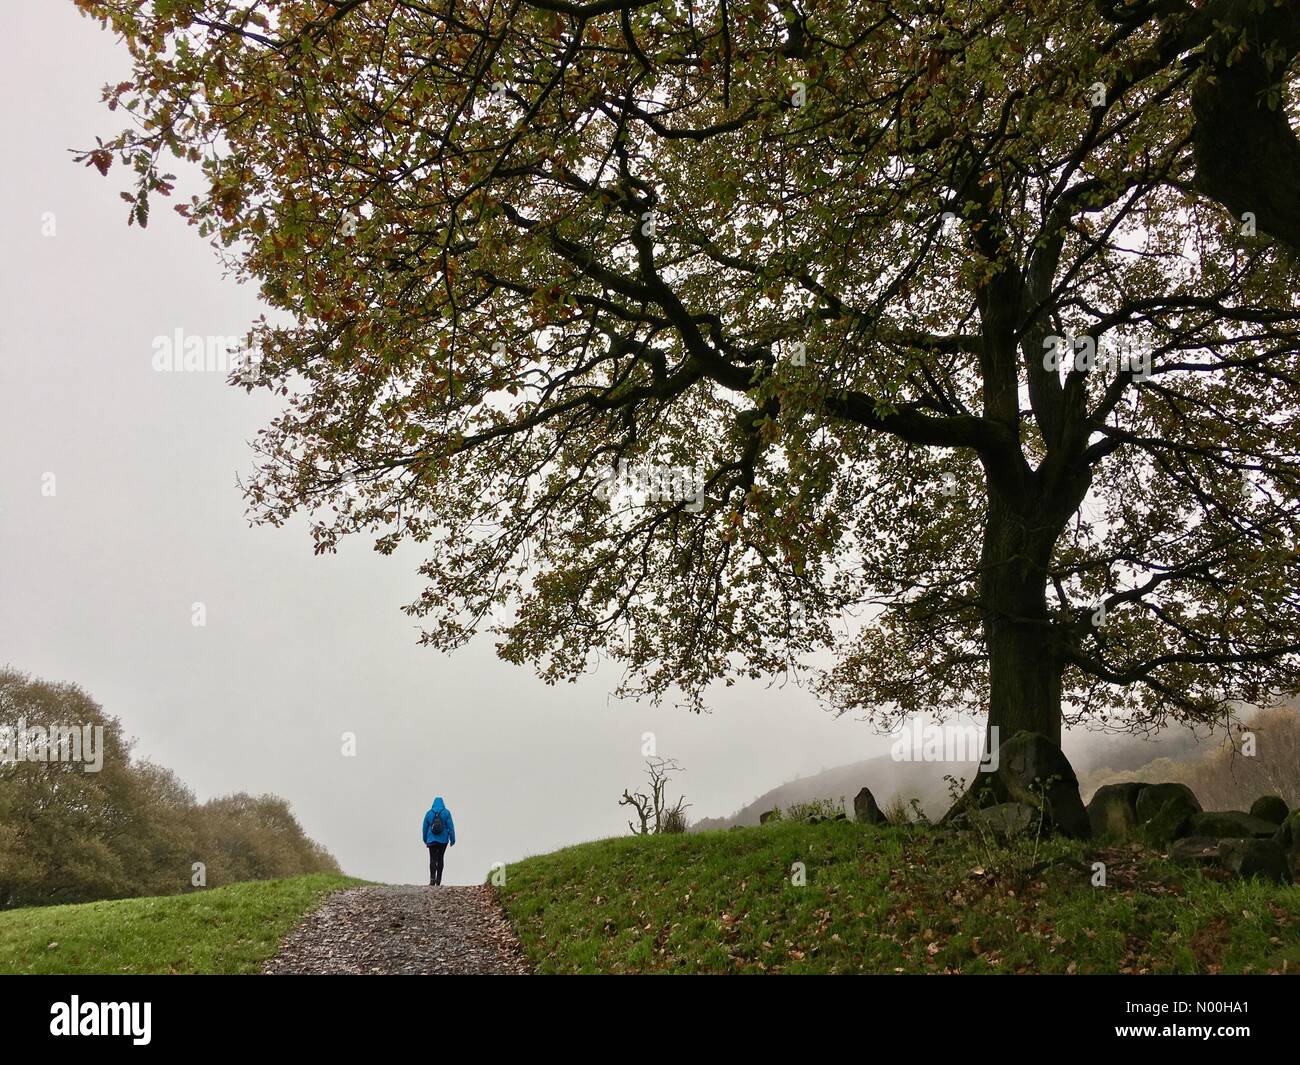 UK Weather: Overcast and drizzle in Chorley, Lancashire. Walking in Anglezarke near Chorley on a dull and damp Autumn day Stock Photo